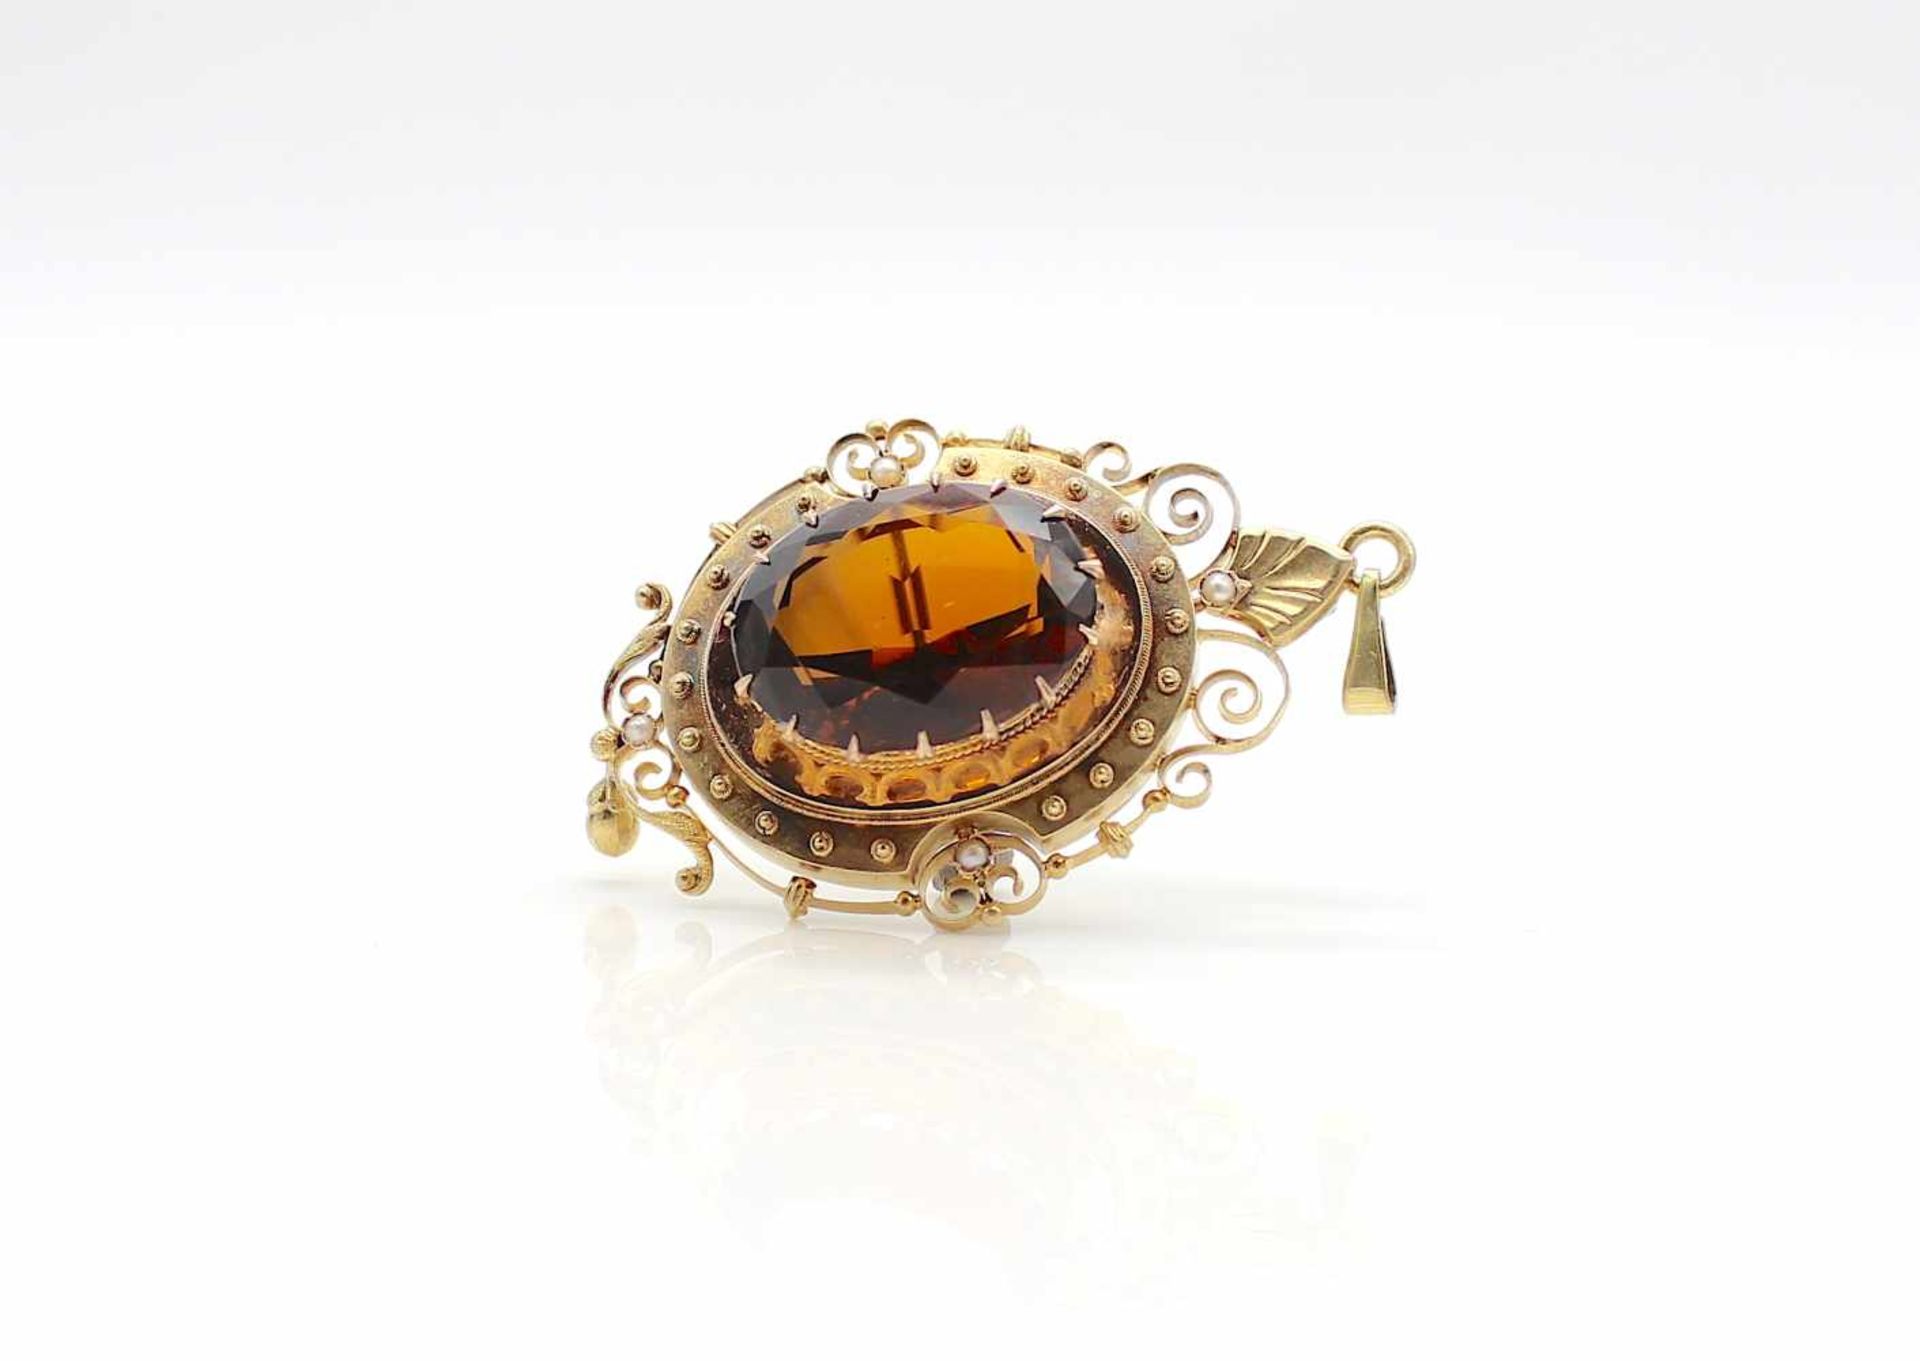 Pendant / brooch gold plated with a quartz and small river beads, weight 12,9 g, dimensions: 32,8 - Bild 3 aus 4